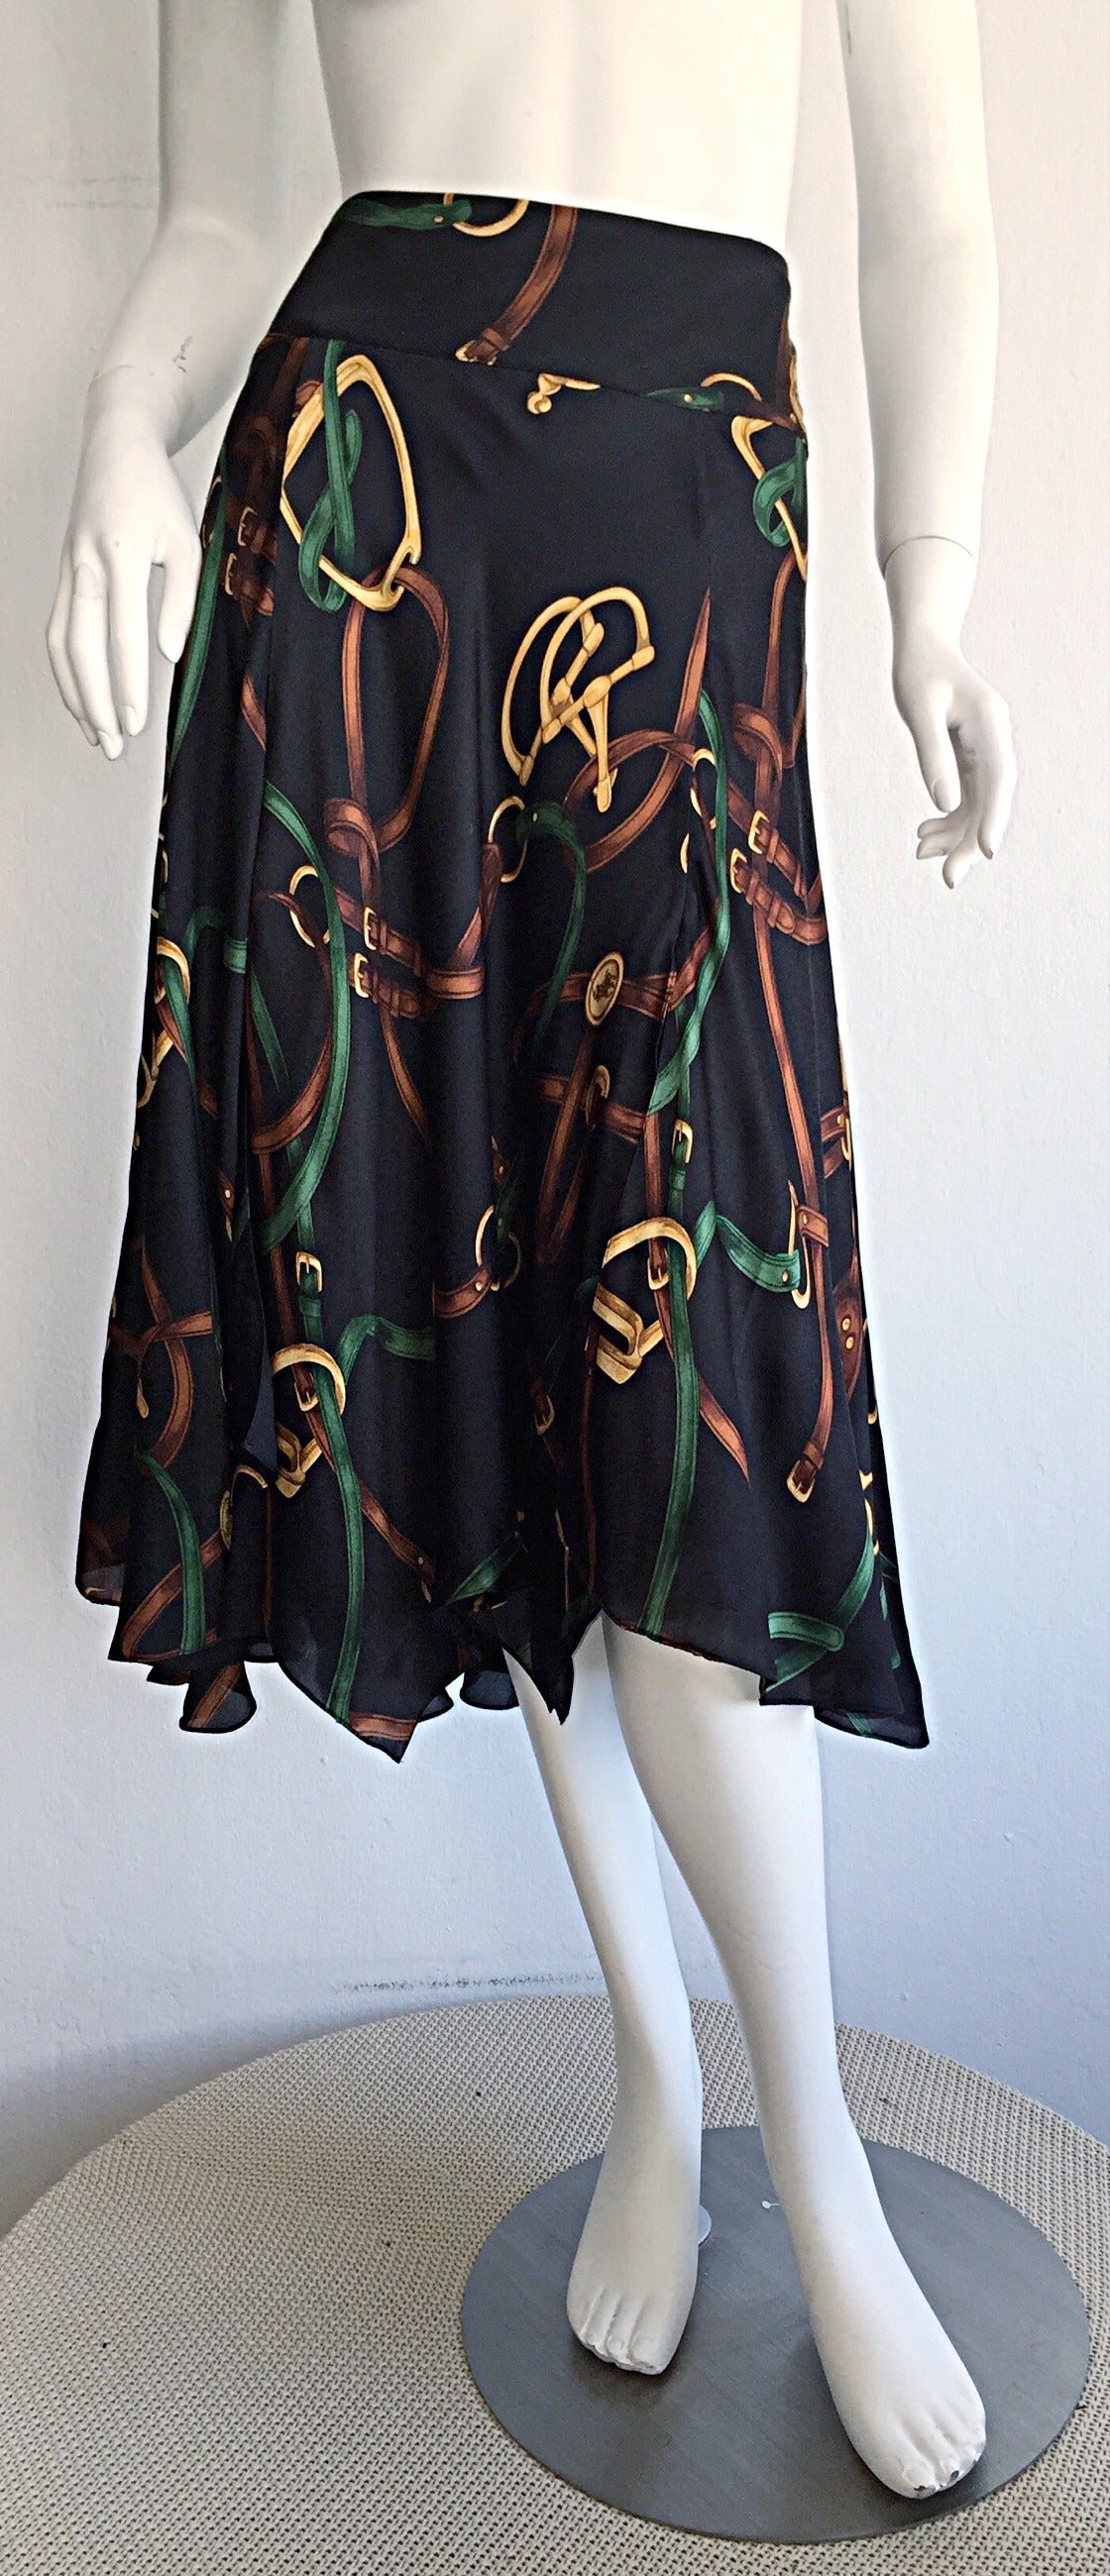 Iconic vintage Ralph Lauren 'Blue Label' silk skirt! Handsome equestrian theme, with horsebits and belts. Panels of flowy silk make for a flirty fit. Black background, with green, yellow, gold and brown accents. Fully lined. In great condition. Size